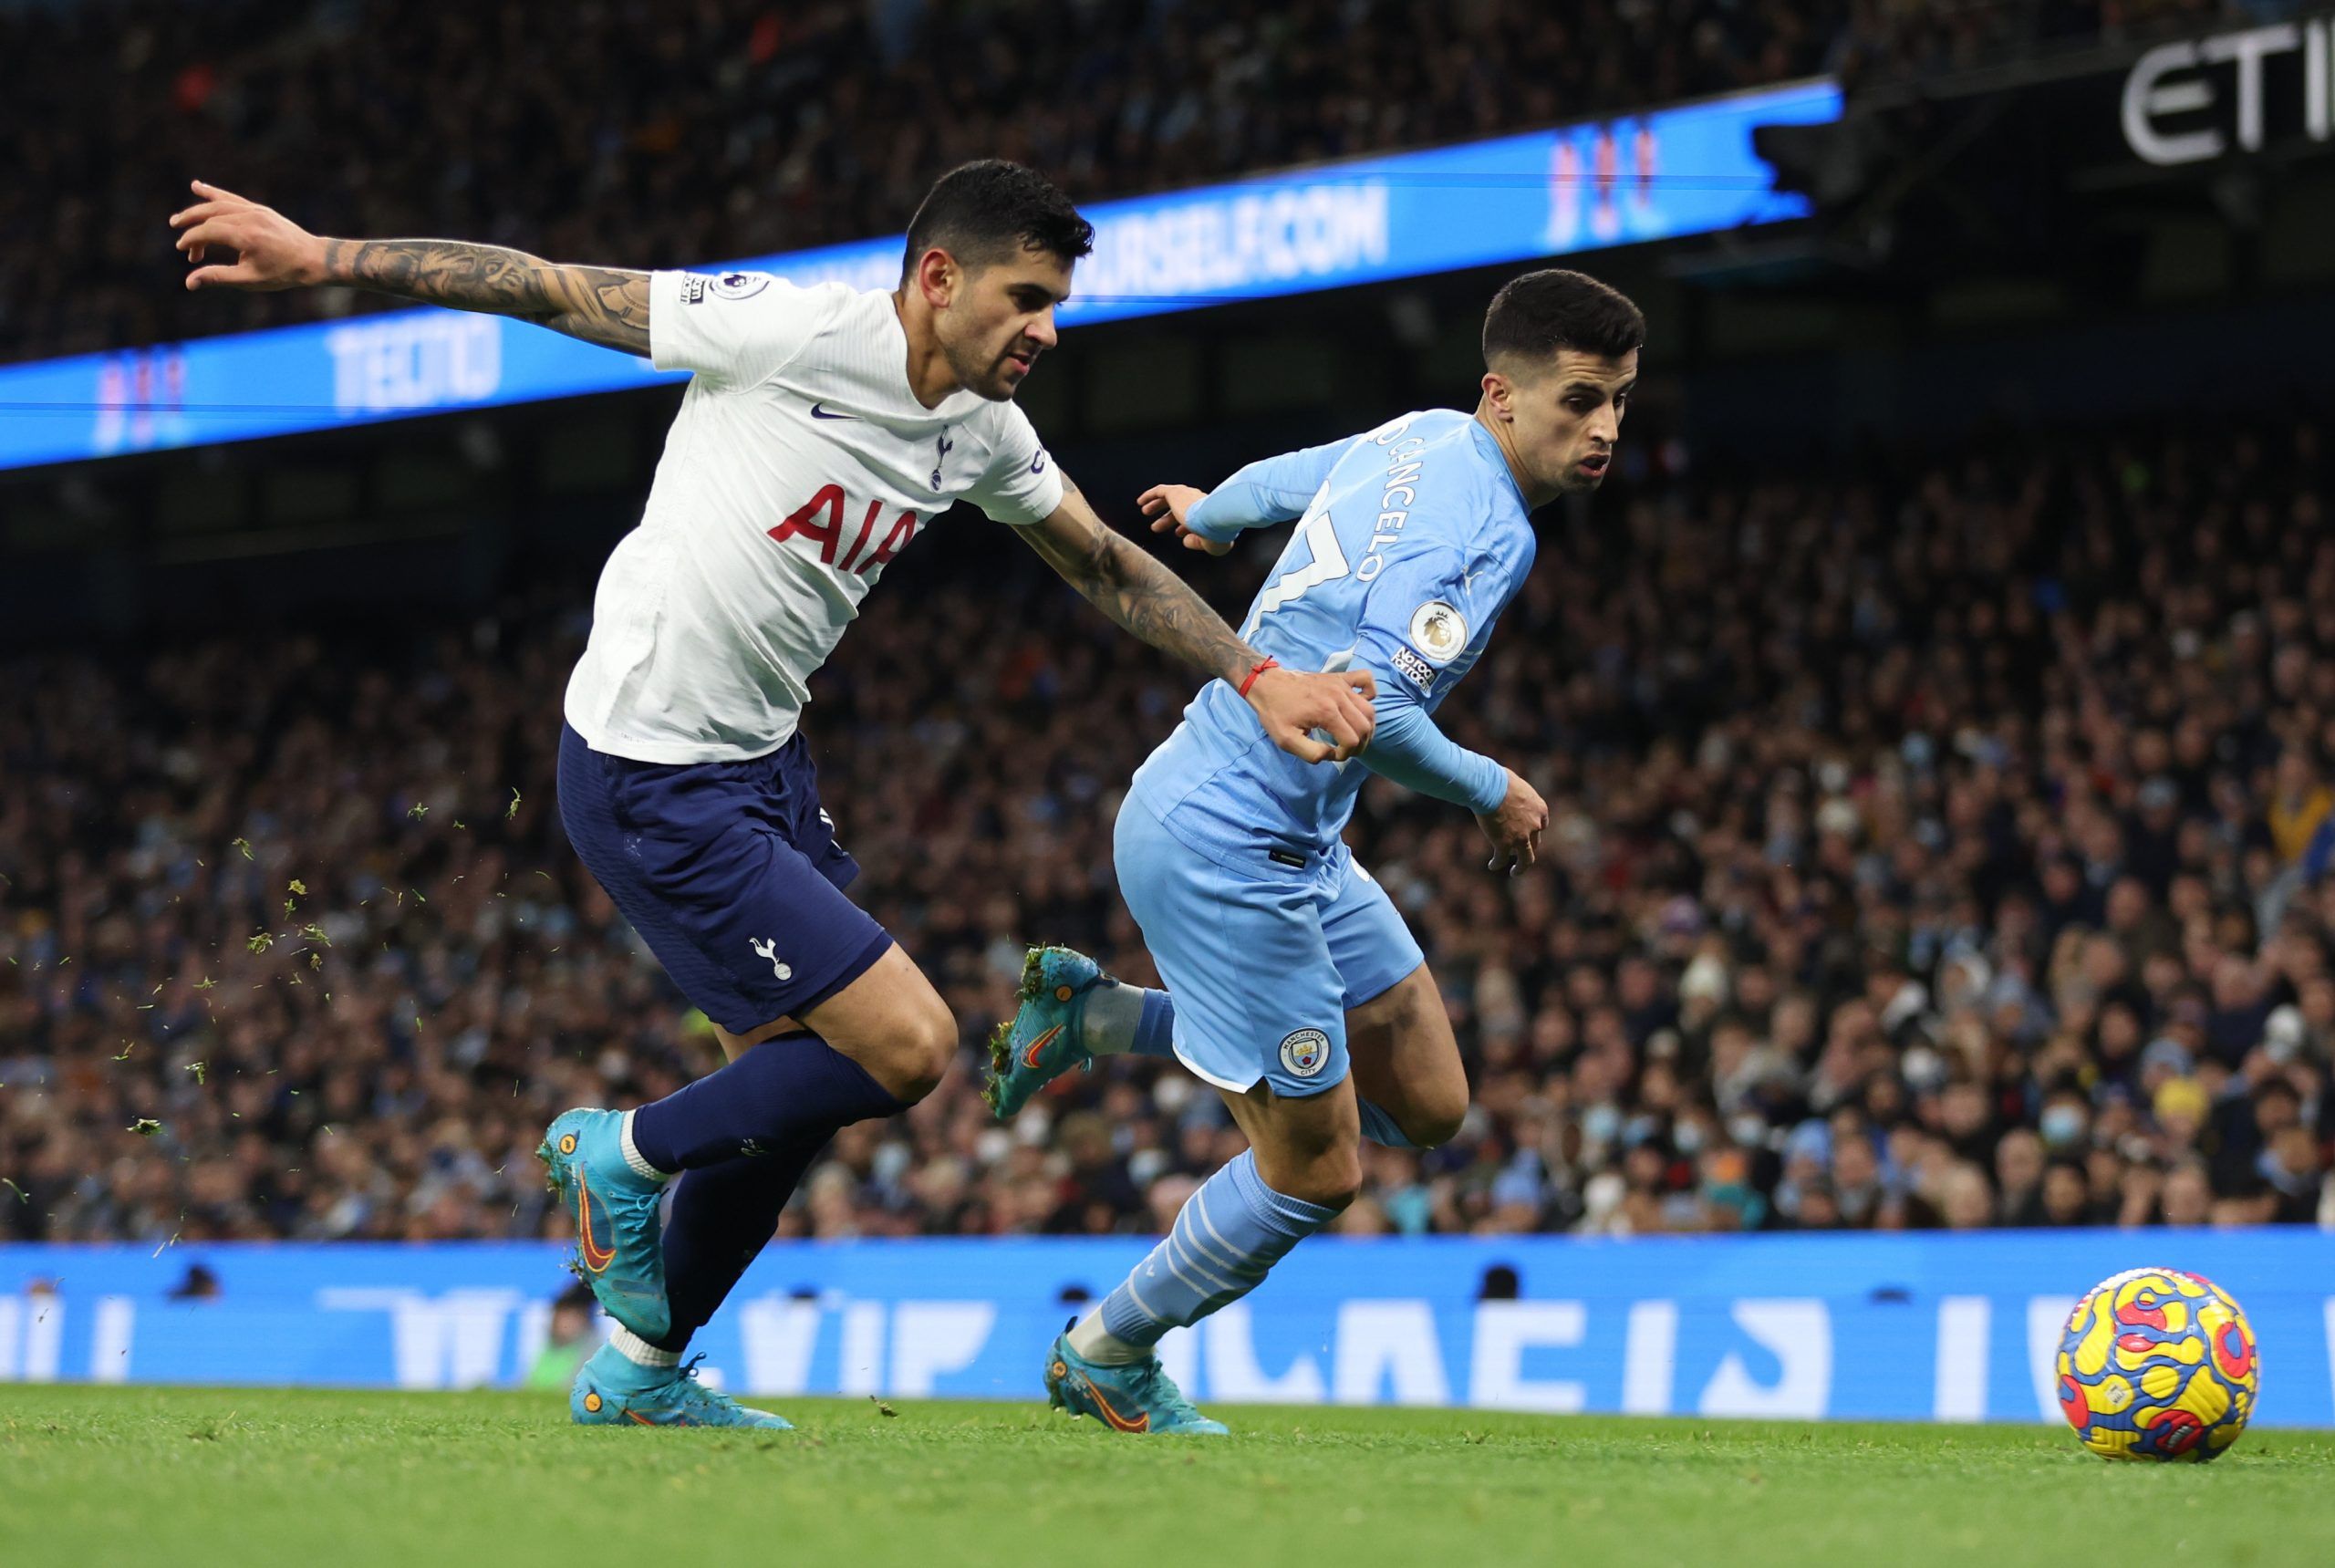 Soccer Football - Premier League - Manchester City v Tottenham Hotspur - Etihad Stadium, Manchester, Britain - February 19, 2022 Manchester City's Joao Cancelo in action with Tottenham Hotspur's Cristian Romero Action Images via Reuters/Carl Recine EDITORIAL USE ONLY. No use with unauthorized audio, video, data, fixture lists, club/league logos or 'live' services. Online in-match use limited to 75 images, no video emulation. No use in betting, games or single club /league/player publications.  P